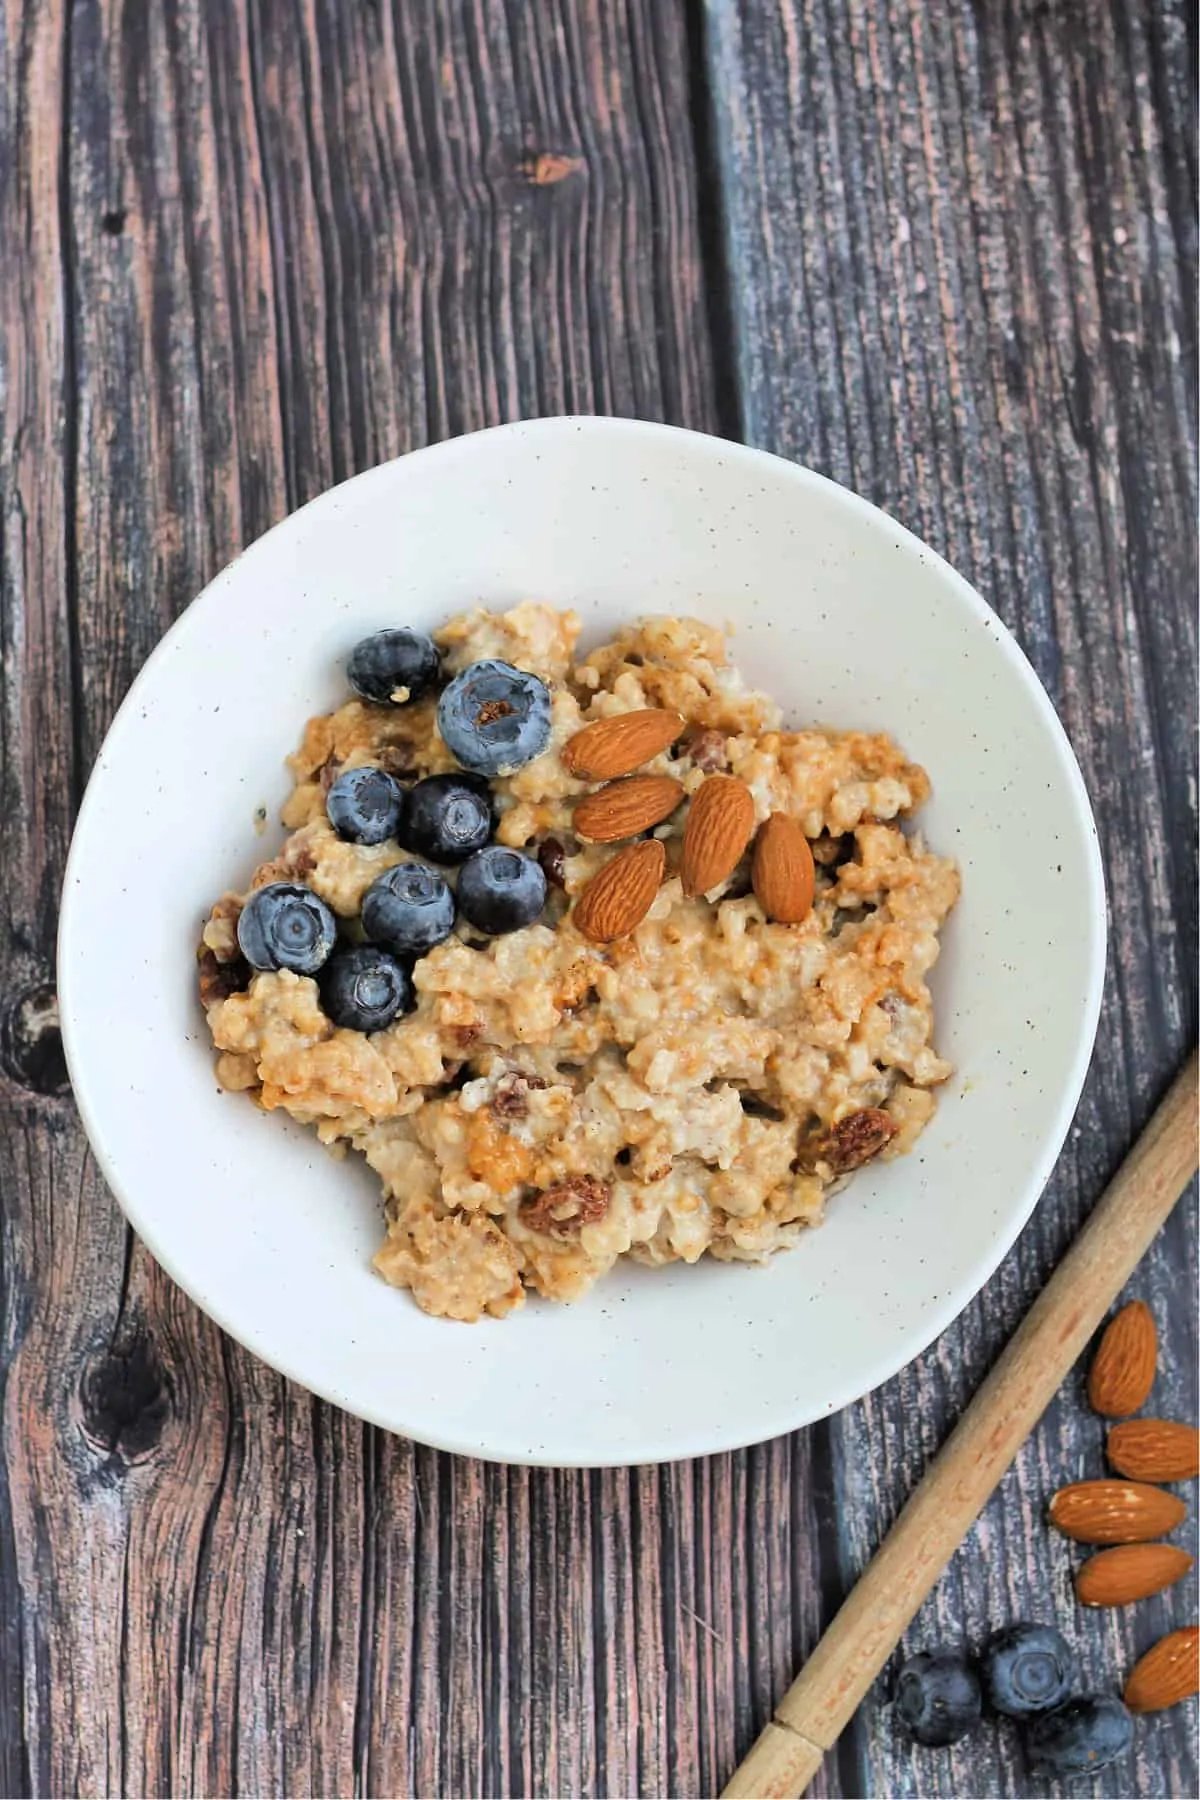 A white bowl of porridge/oatmeal with almonds and blueberries on top.